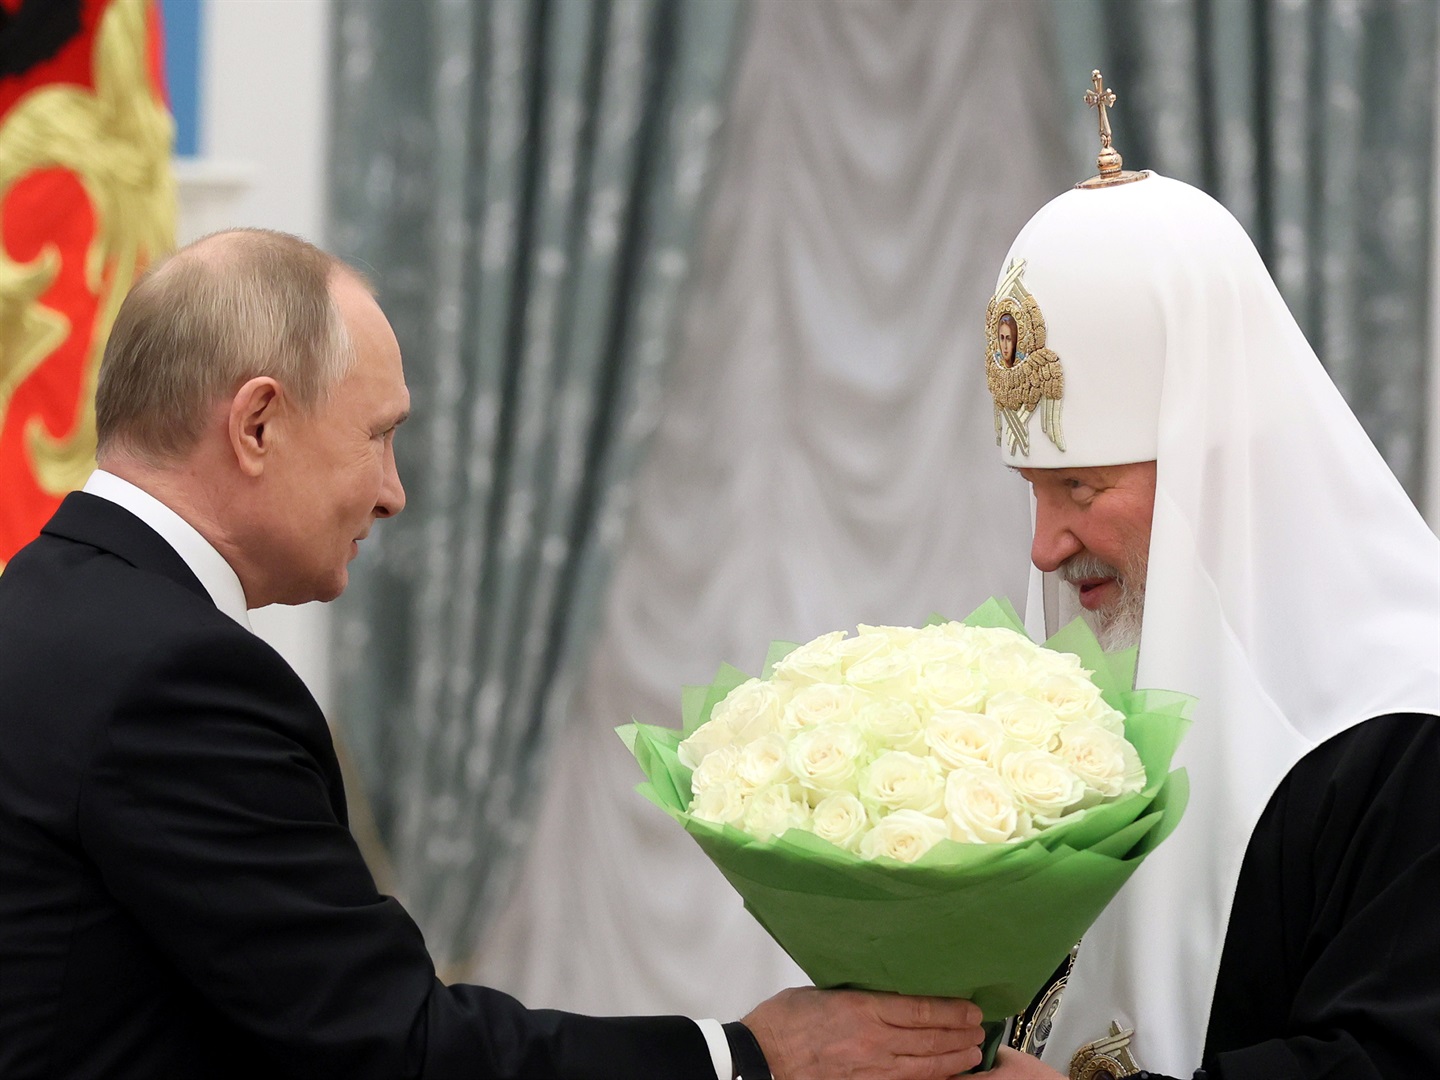 Russian President Vladimir Putin presents flowers during a ceremony to award the Order of St. Andrew the Apostle the First-Called to Patriarch Kirill of Moscow and All Russia in Moscow, Russia November 20, 2021. Sputnik/Mikhail Metzel/Pool via REUTERS